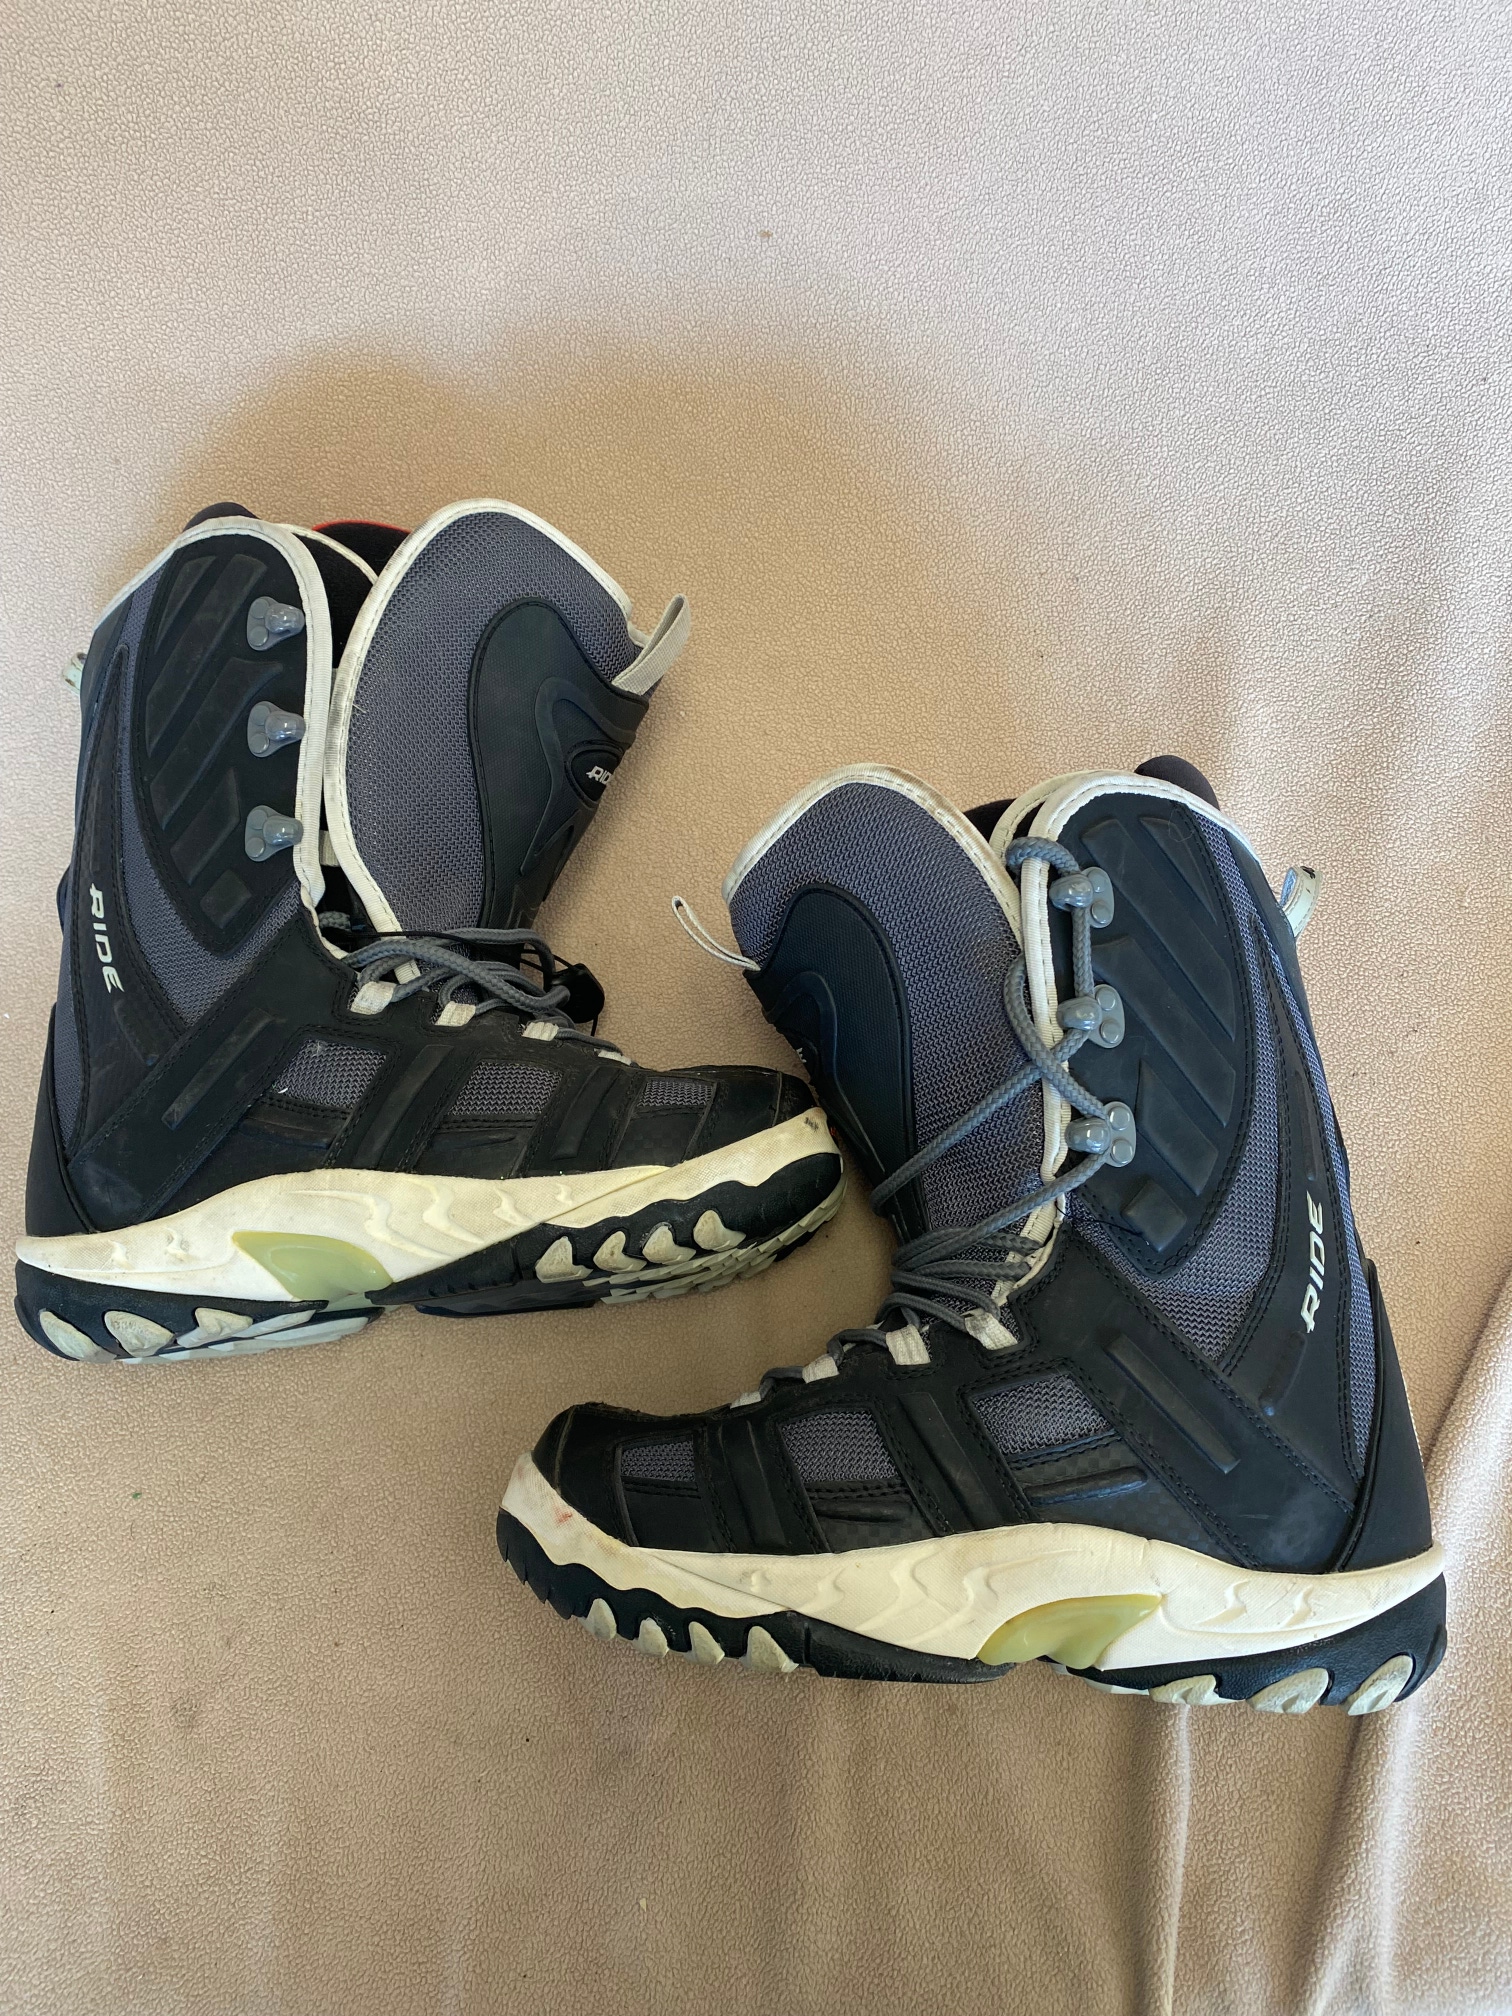 Men's Used Size 8.5 (Women's 9.5) Ride Snowboard Boots All Mountain